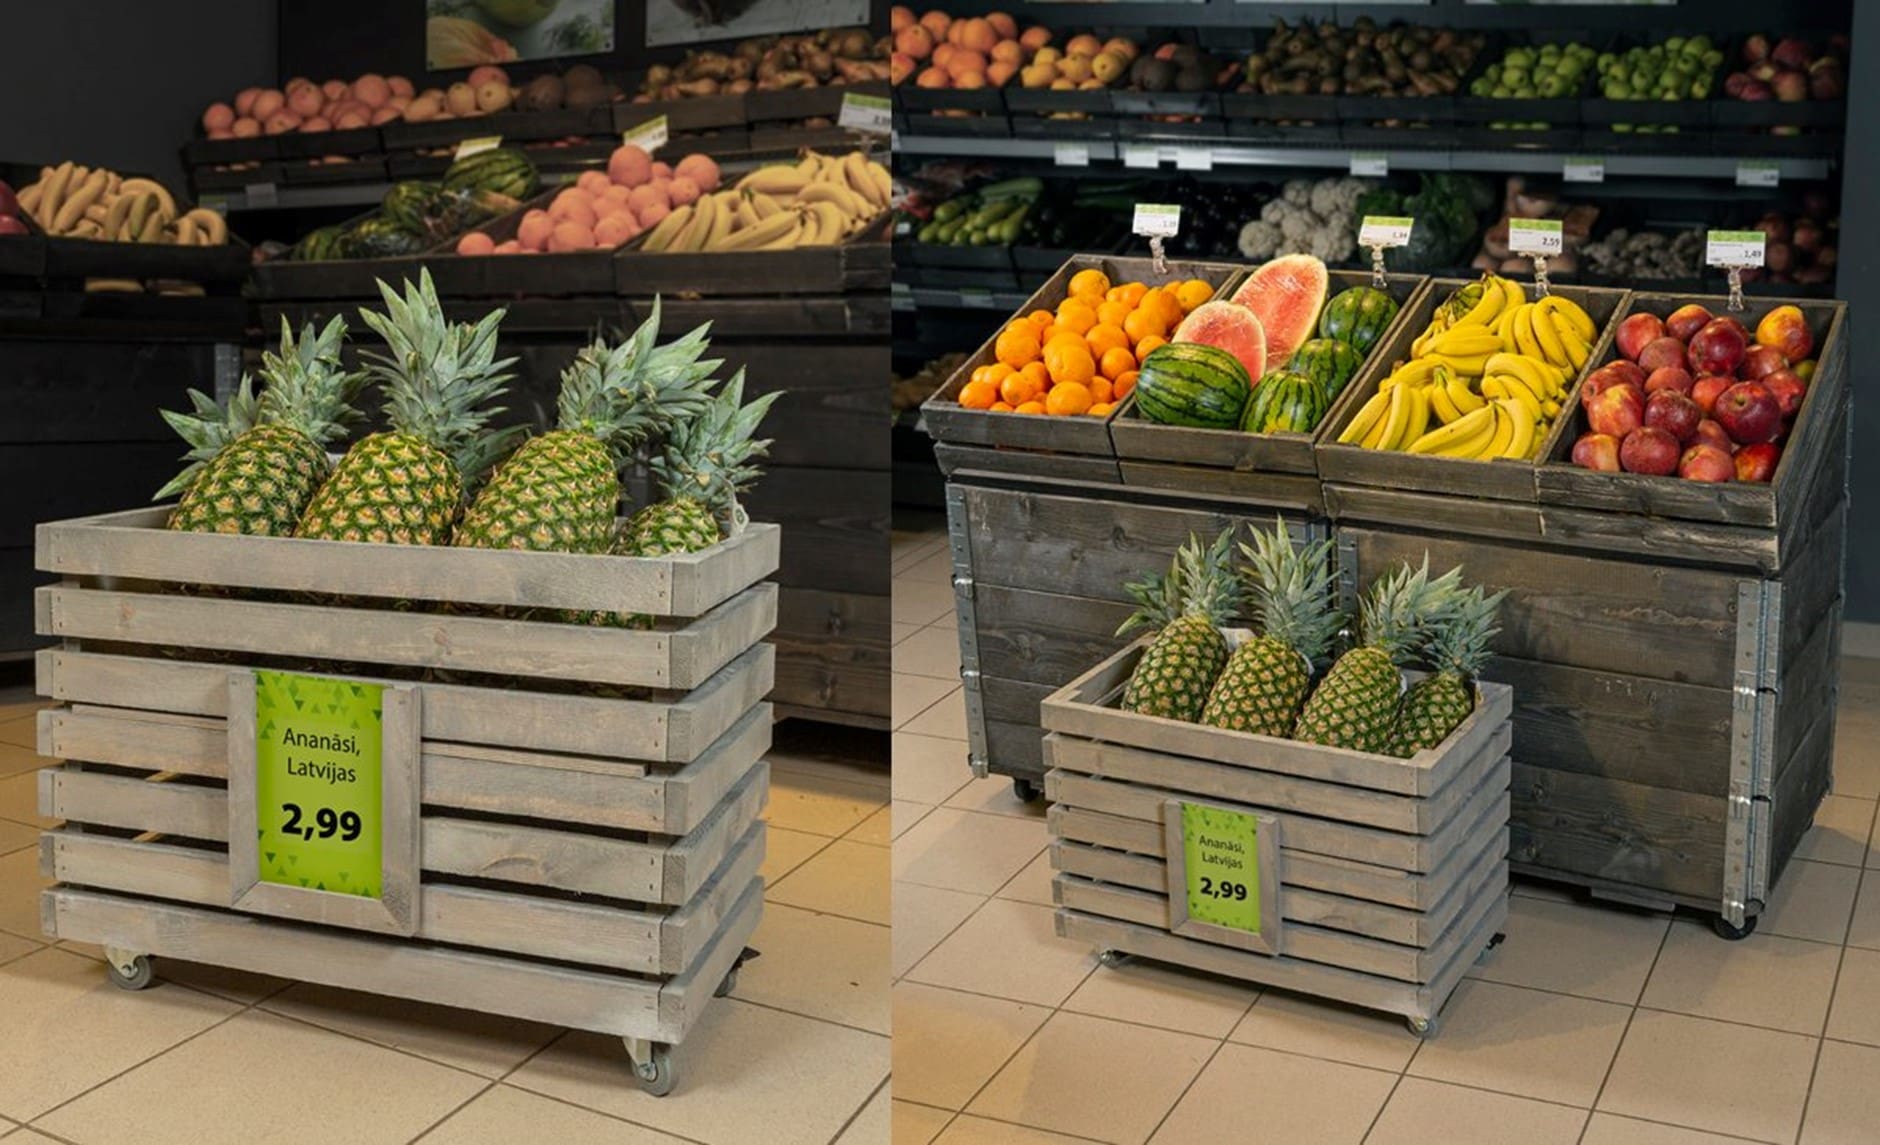 wooden crates for fruit